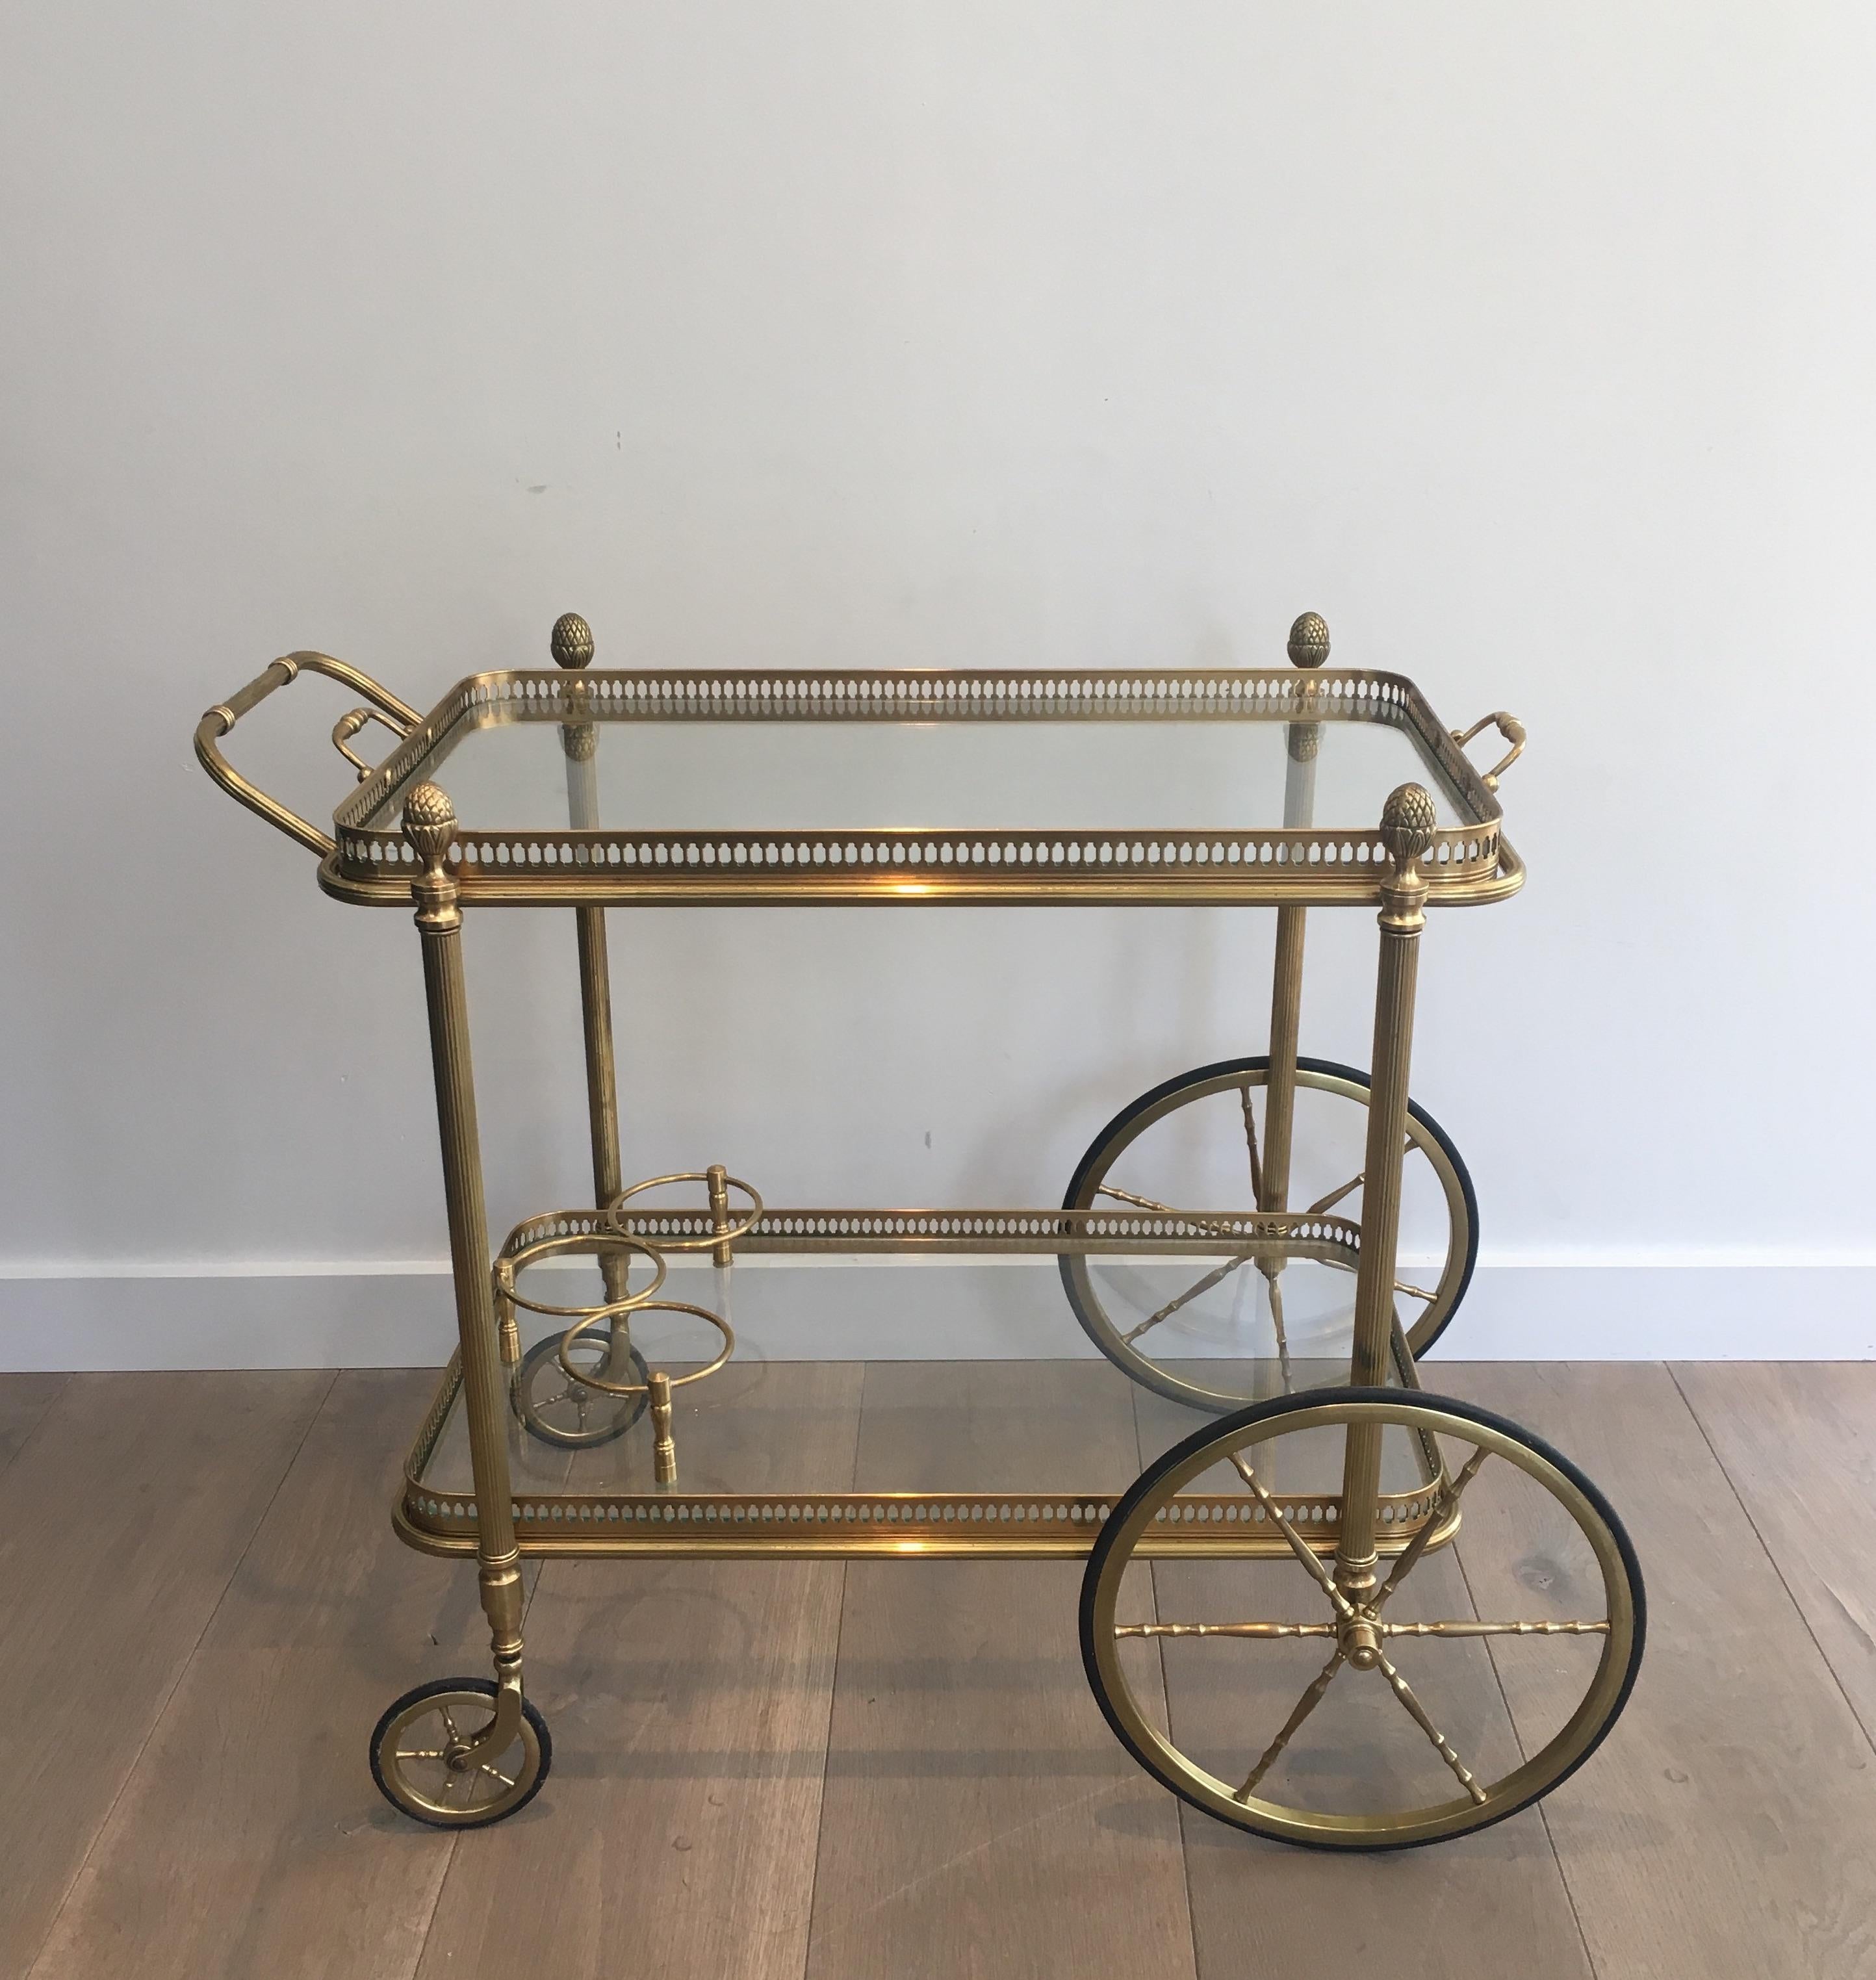 This neoclassical style bar cart is made of brass with removable glass trays. This is a work by famous designer Maison Bagués, circa 1940.